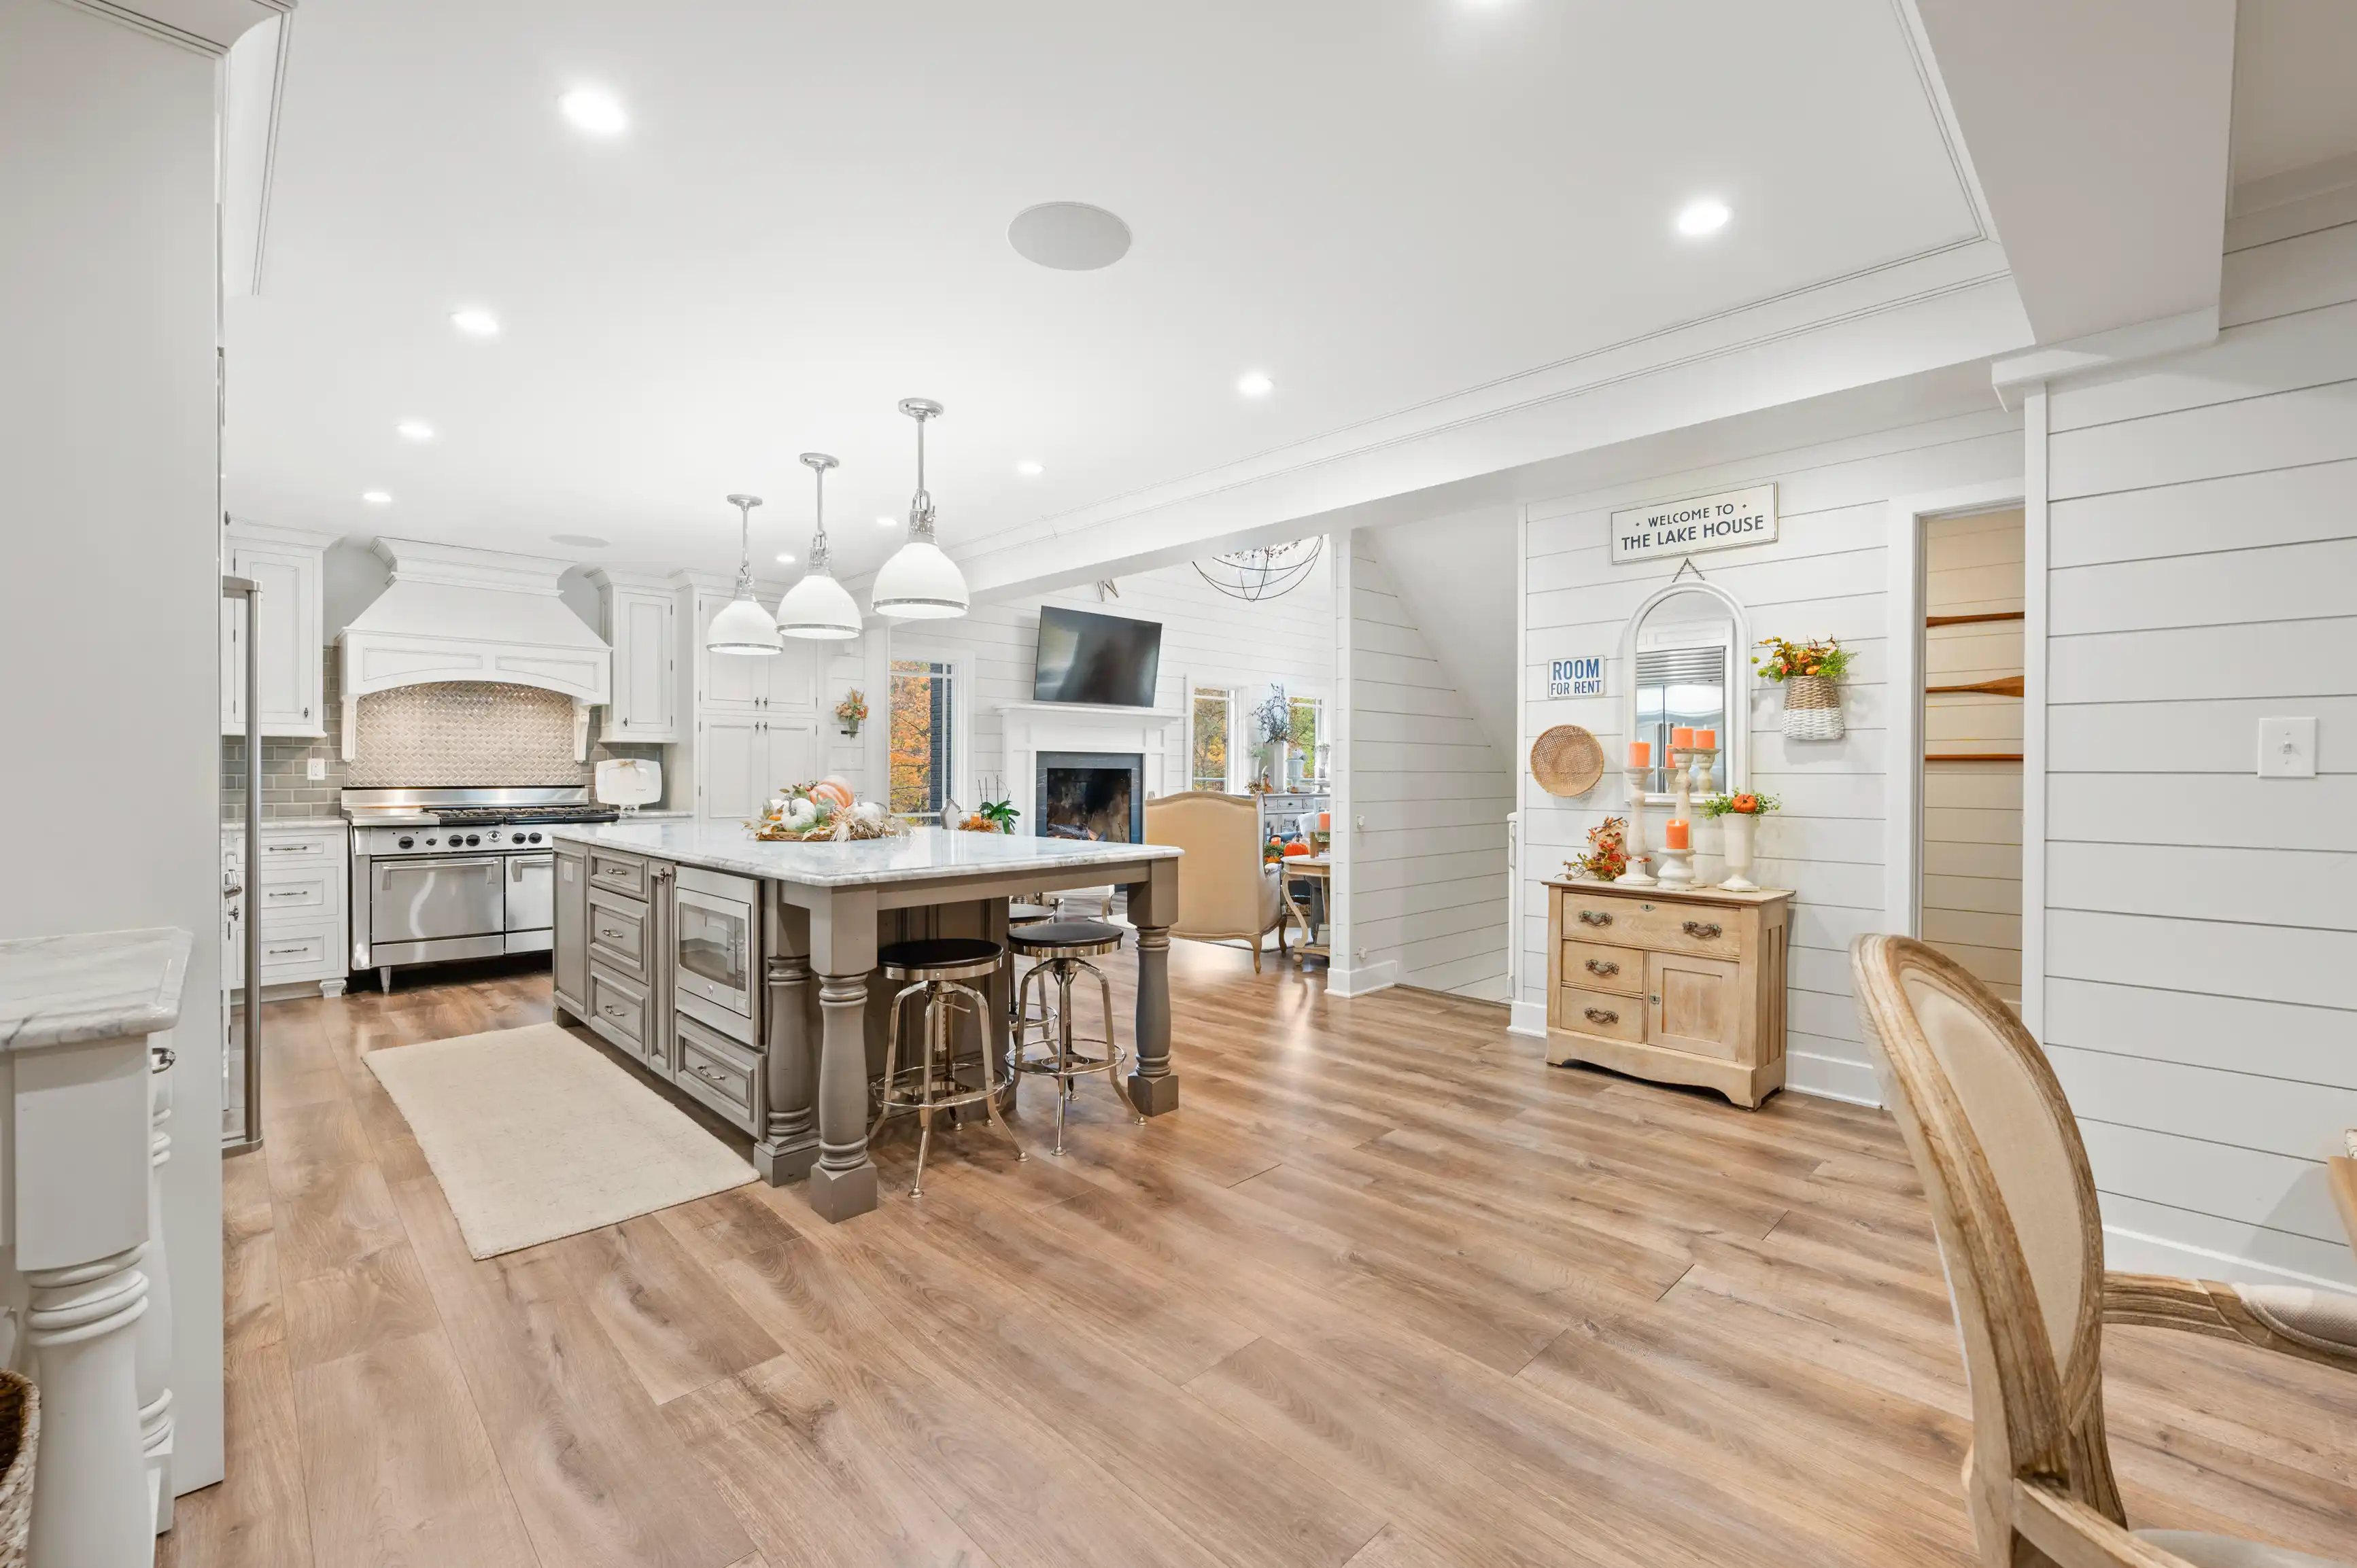 Bright and spacious kitchen interior with white cabinetry, a central island with stools, wooden floors, and an adjoining cozy dining area with fireplace.